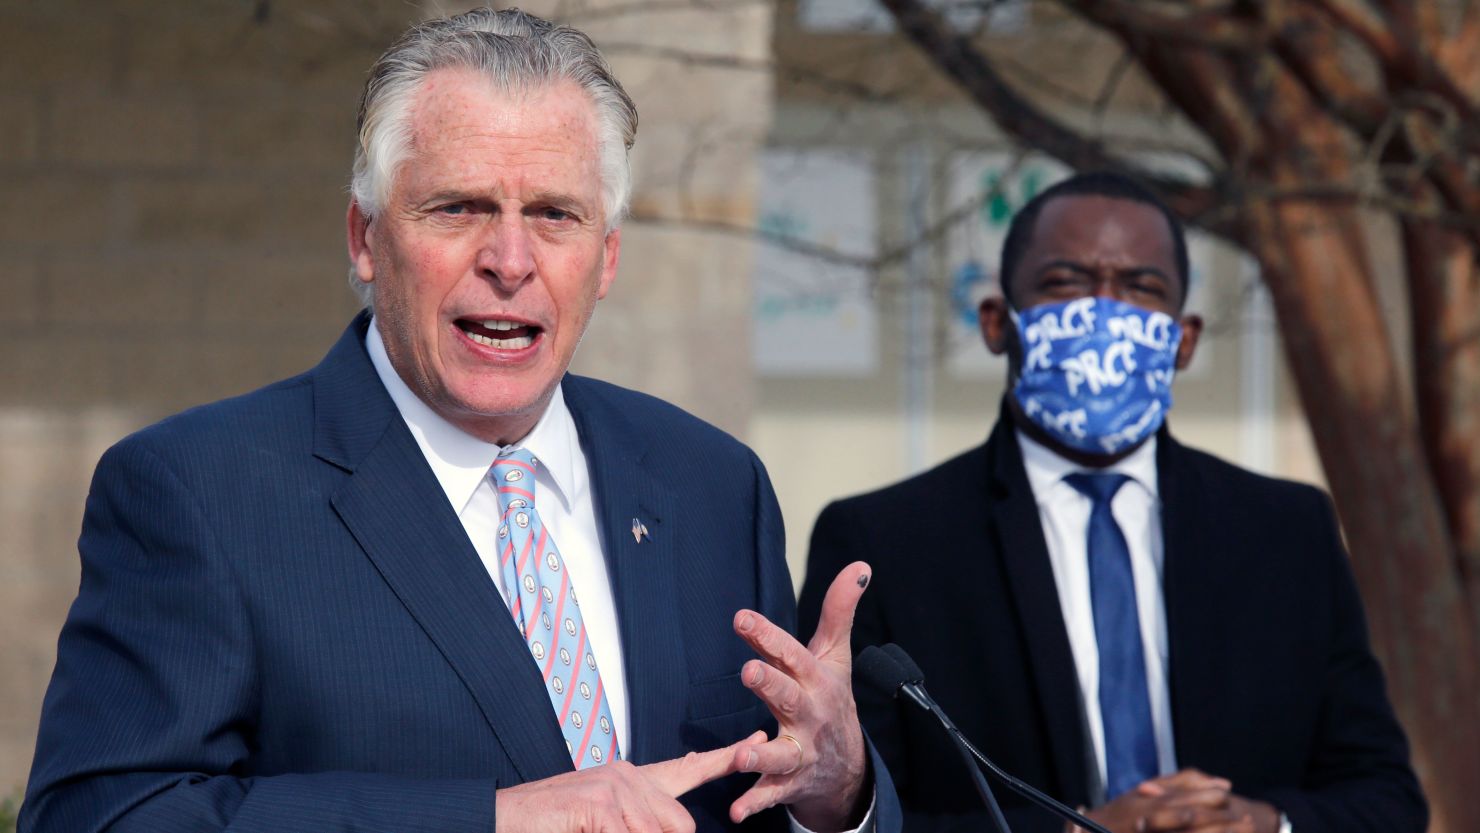 Former Virginia Gov. Terry McAuliffe, left, announces that he is running for the Democratic nomination for governor during a press conference in Richmond, Virginia, on December 9, 2020.